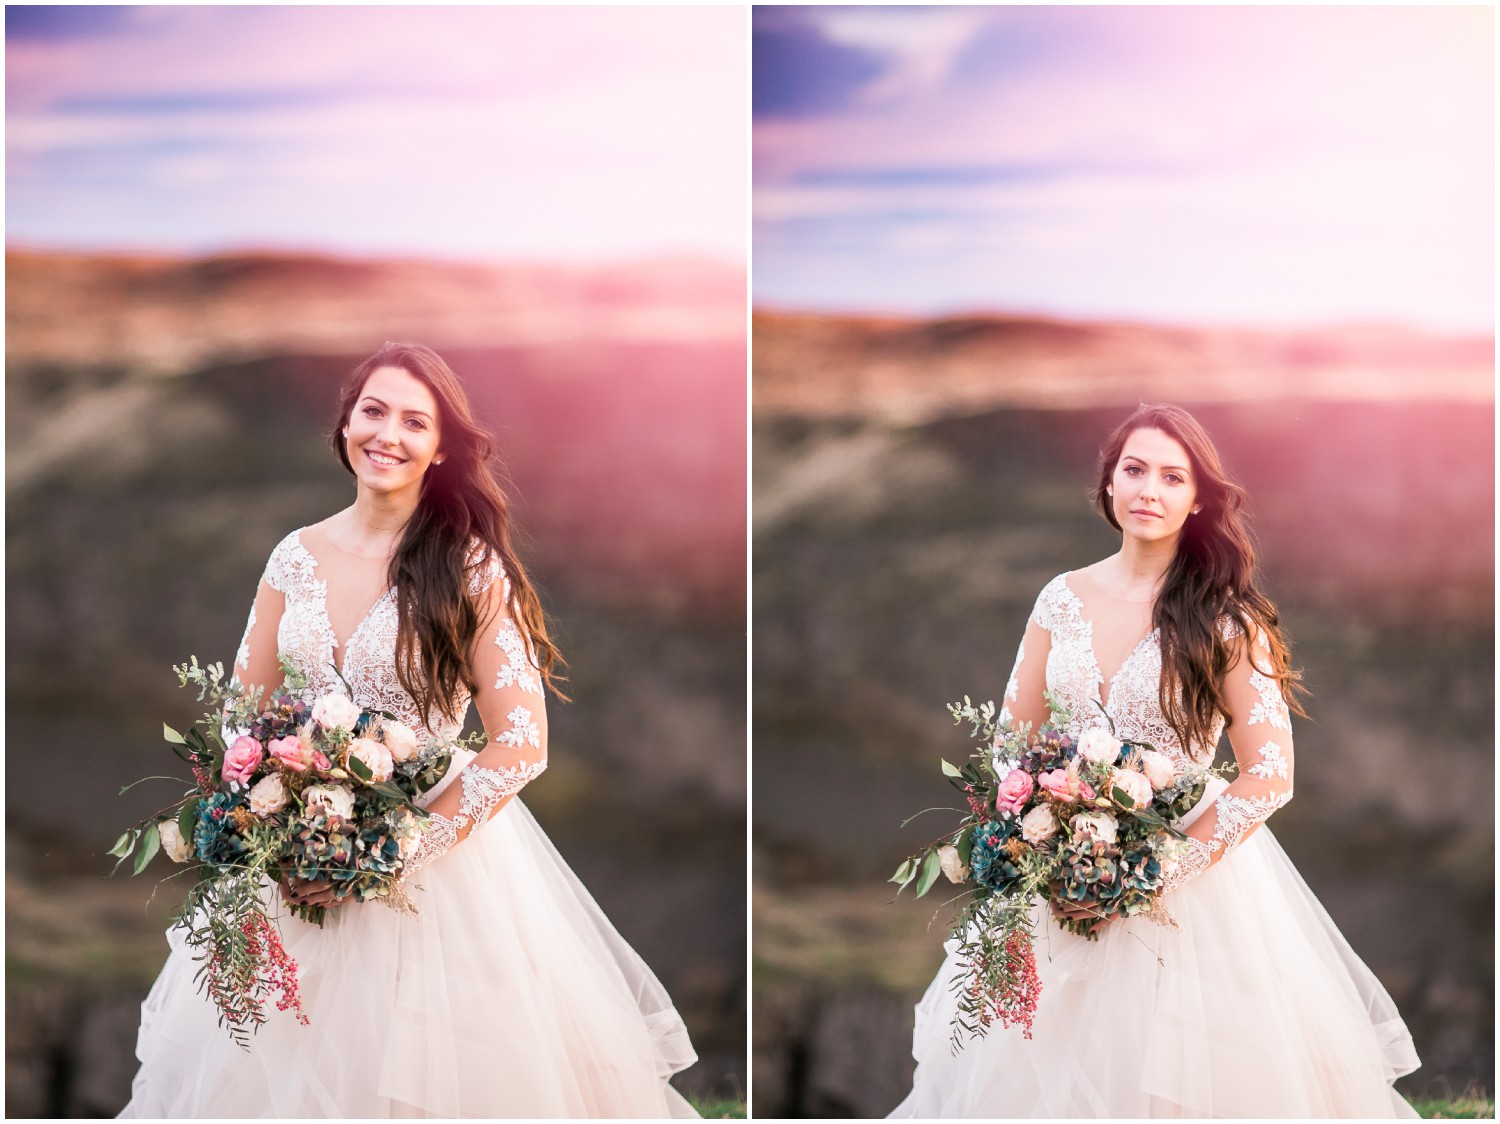 A Sunset Cliff-side Anniversary Session at Palouse Falls